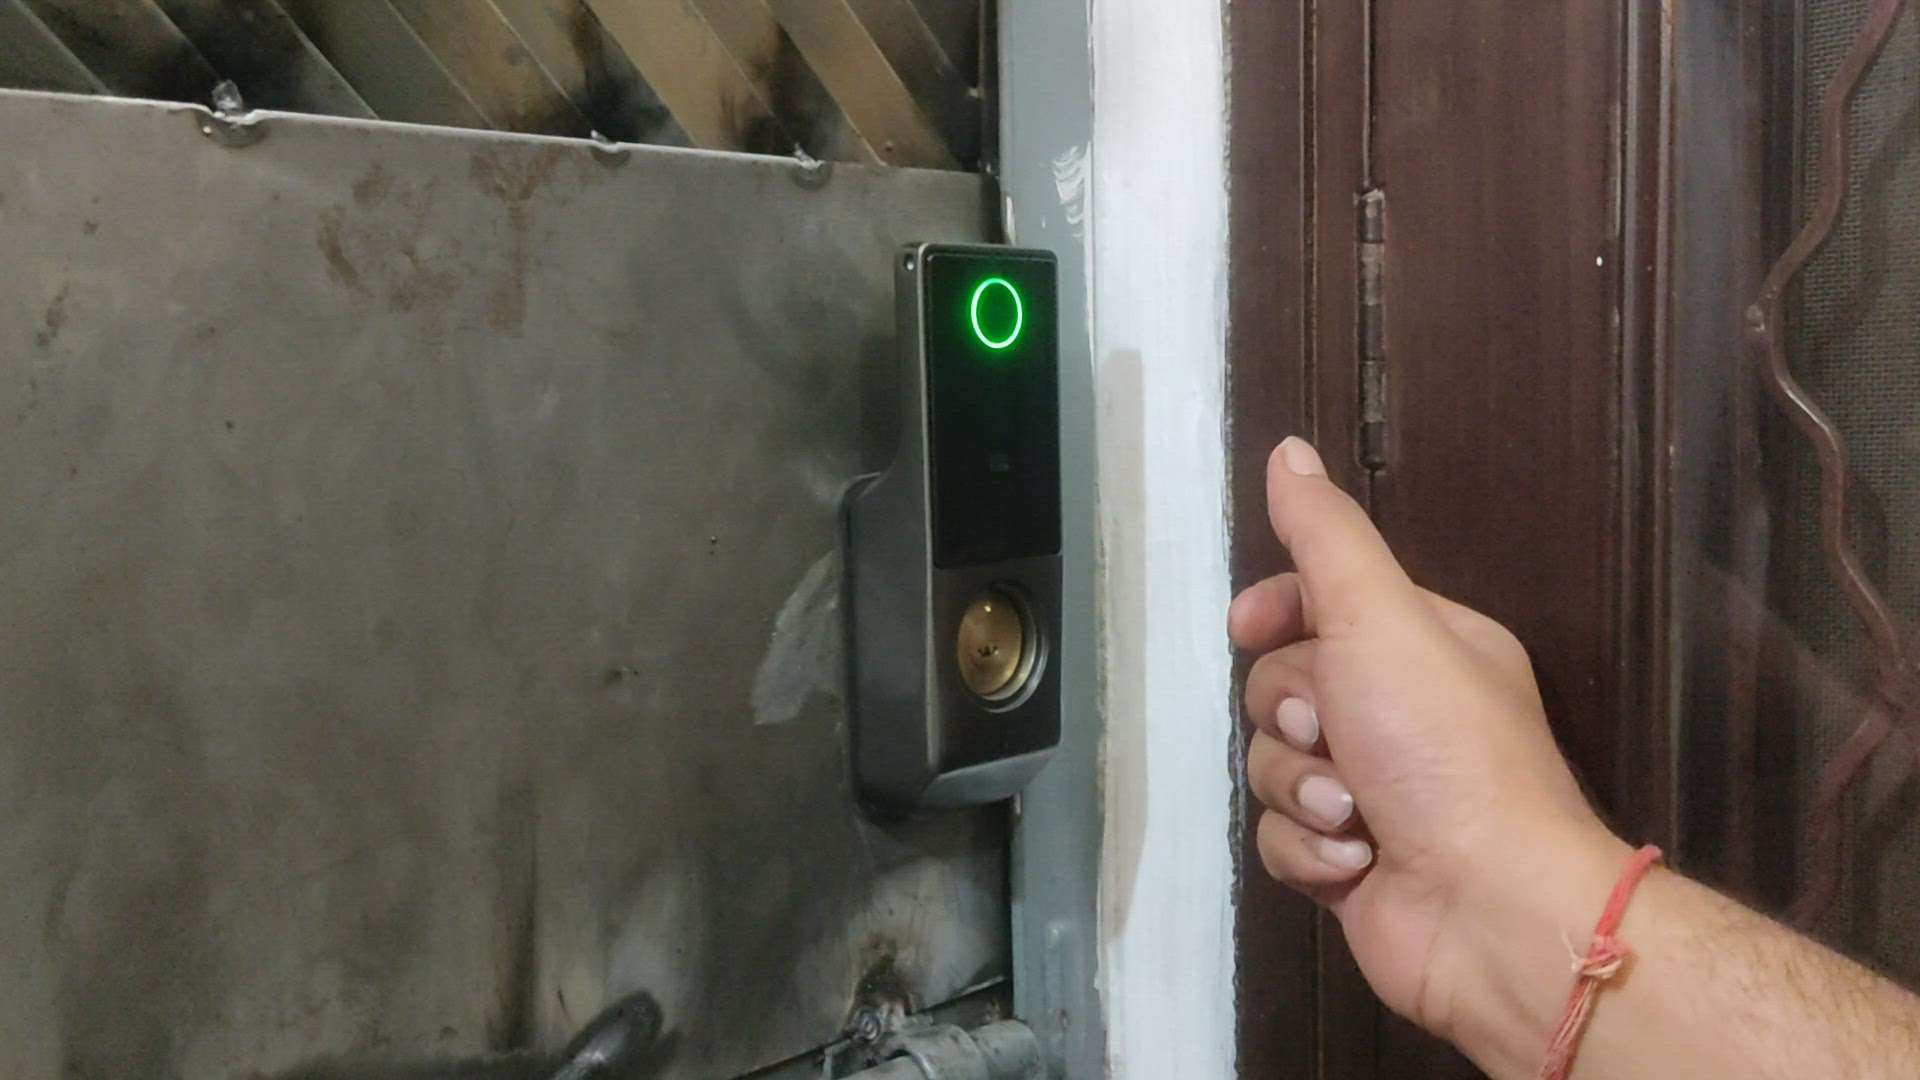 Smart metal door lock Installation, you can unlock it with your fingerprint, RFID, password, mechanical key, mobile app.

Install by BytBots Team

#smartdoorlock 
#smarthomeautomation 
#bytbots 
#homeautomationexperts